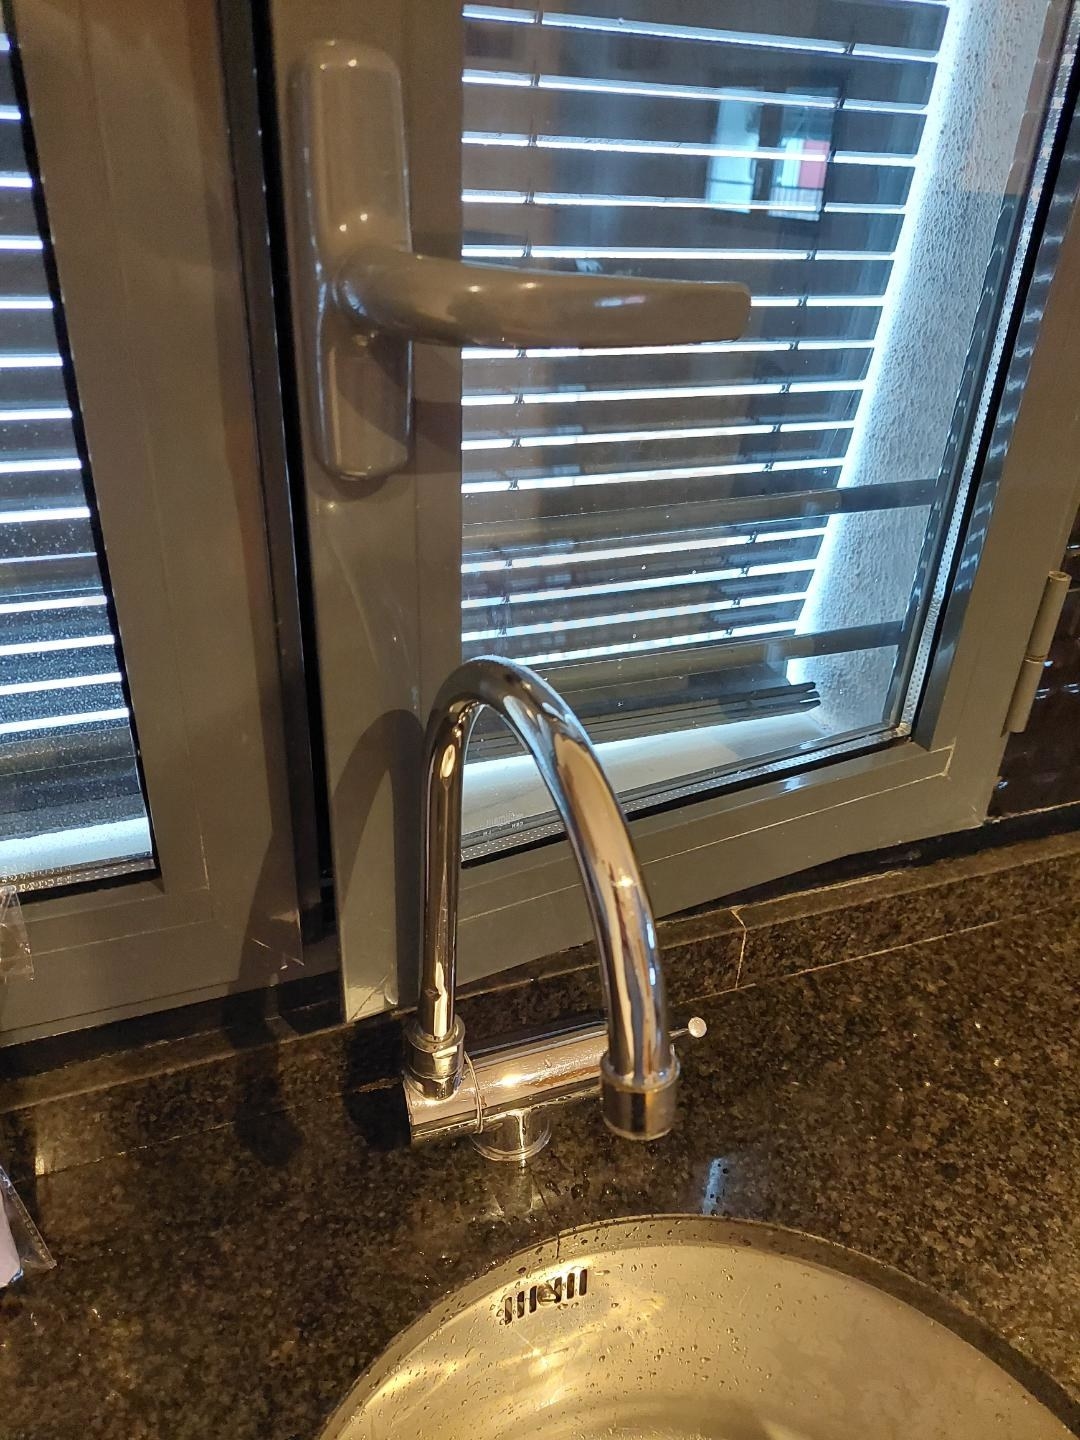 Sink faucet blocking a window from opening out